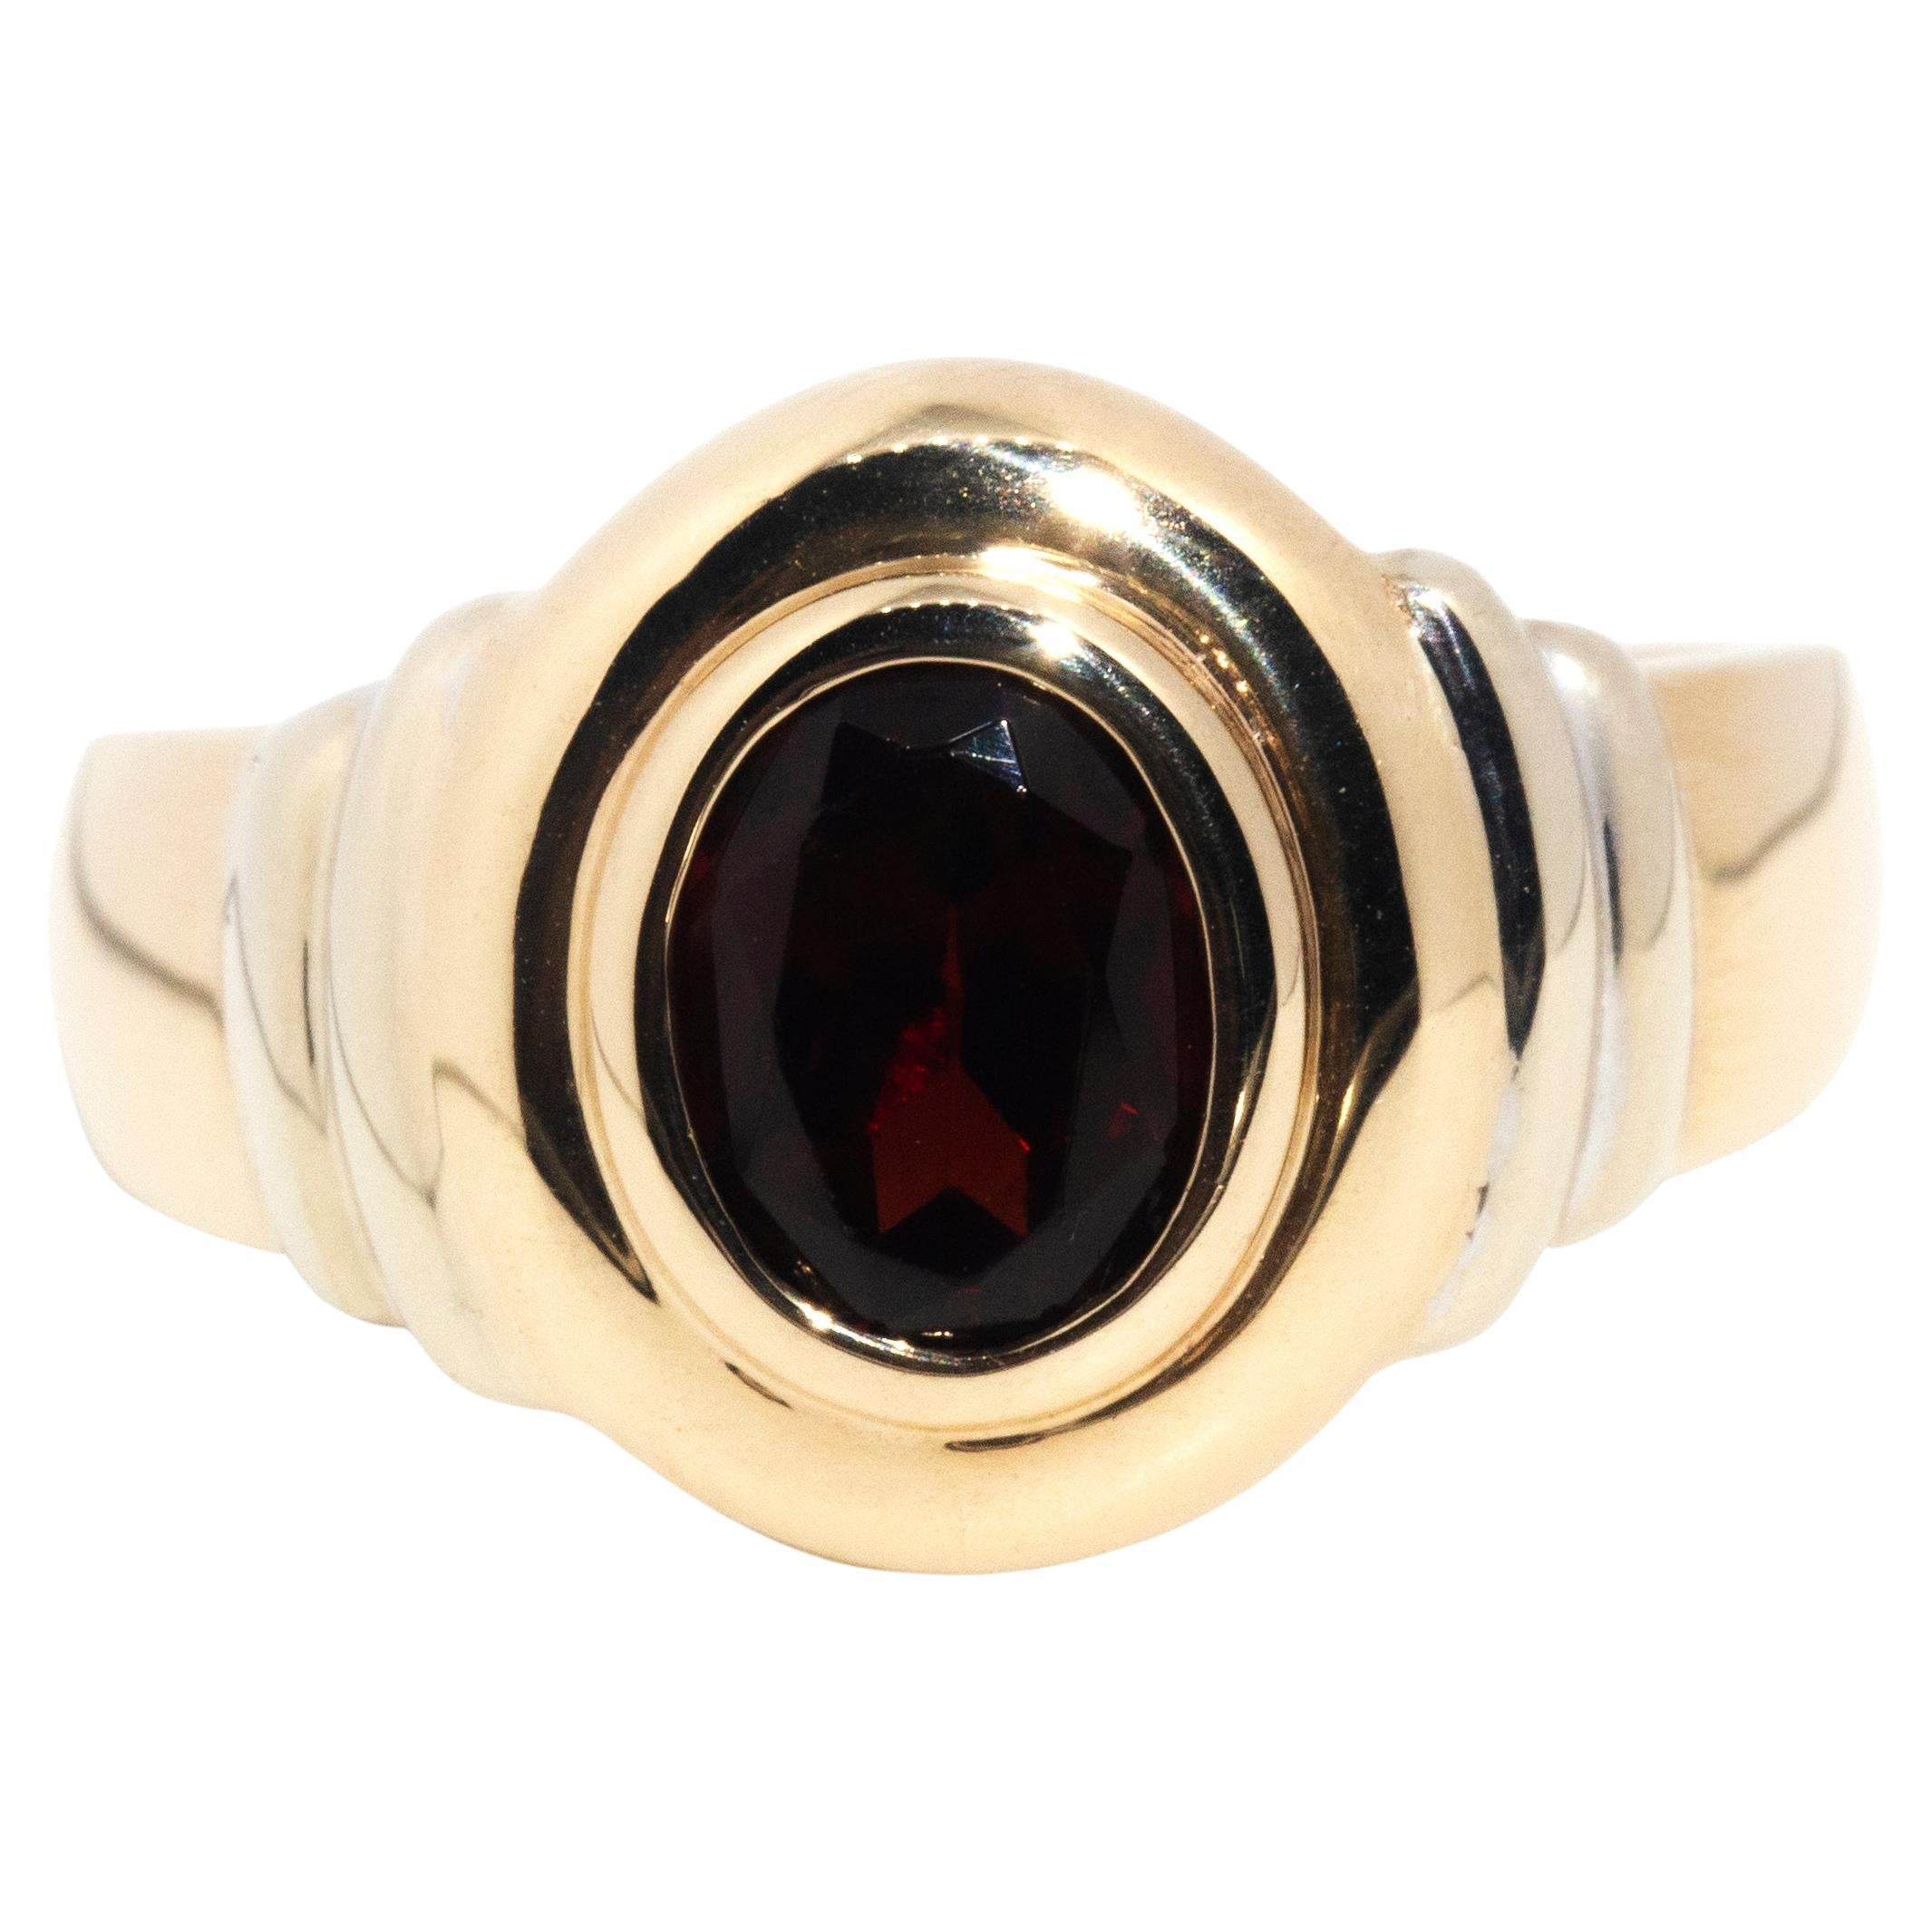 circa 1990s, Vintage 9 Carat Yellow Gold Double Rub over Oval Cut Garnet Ring